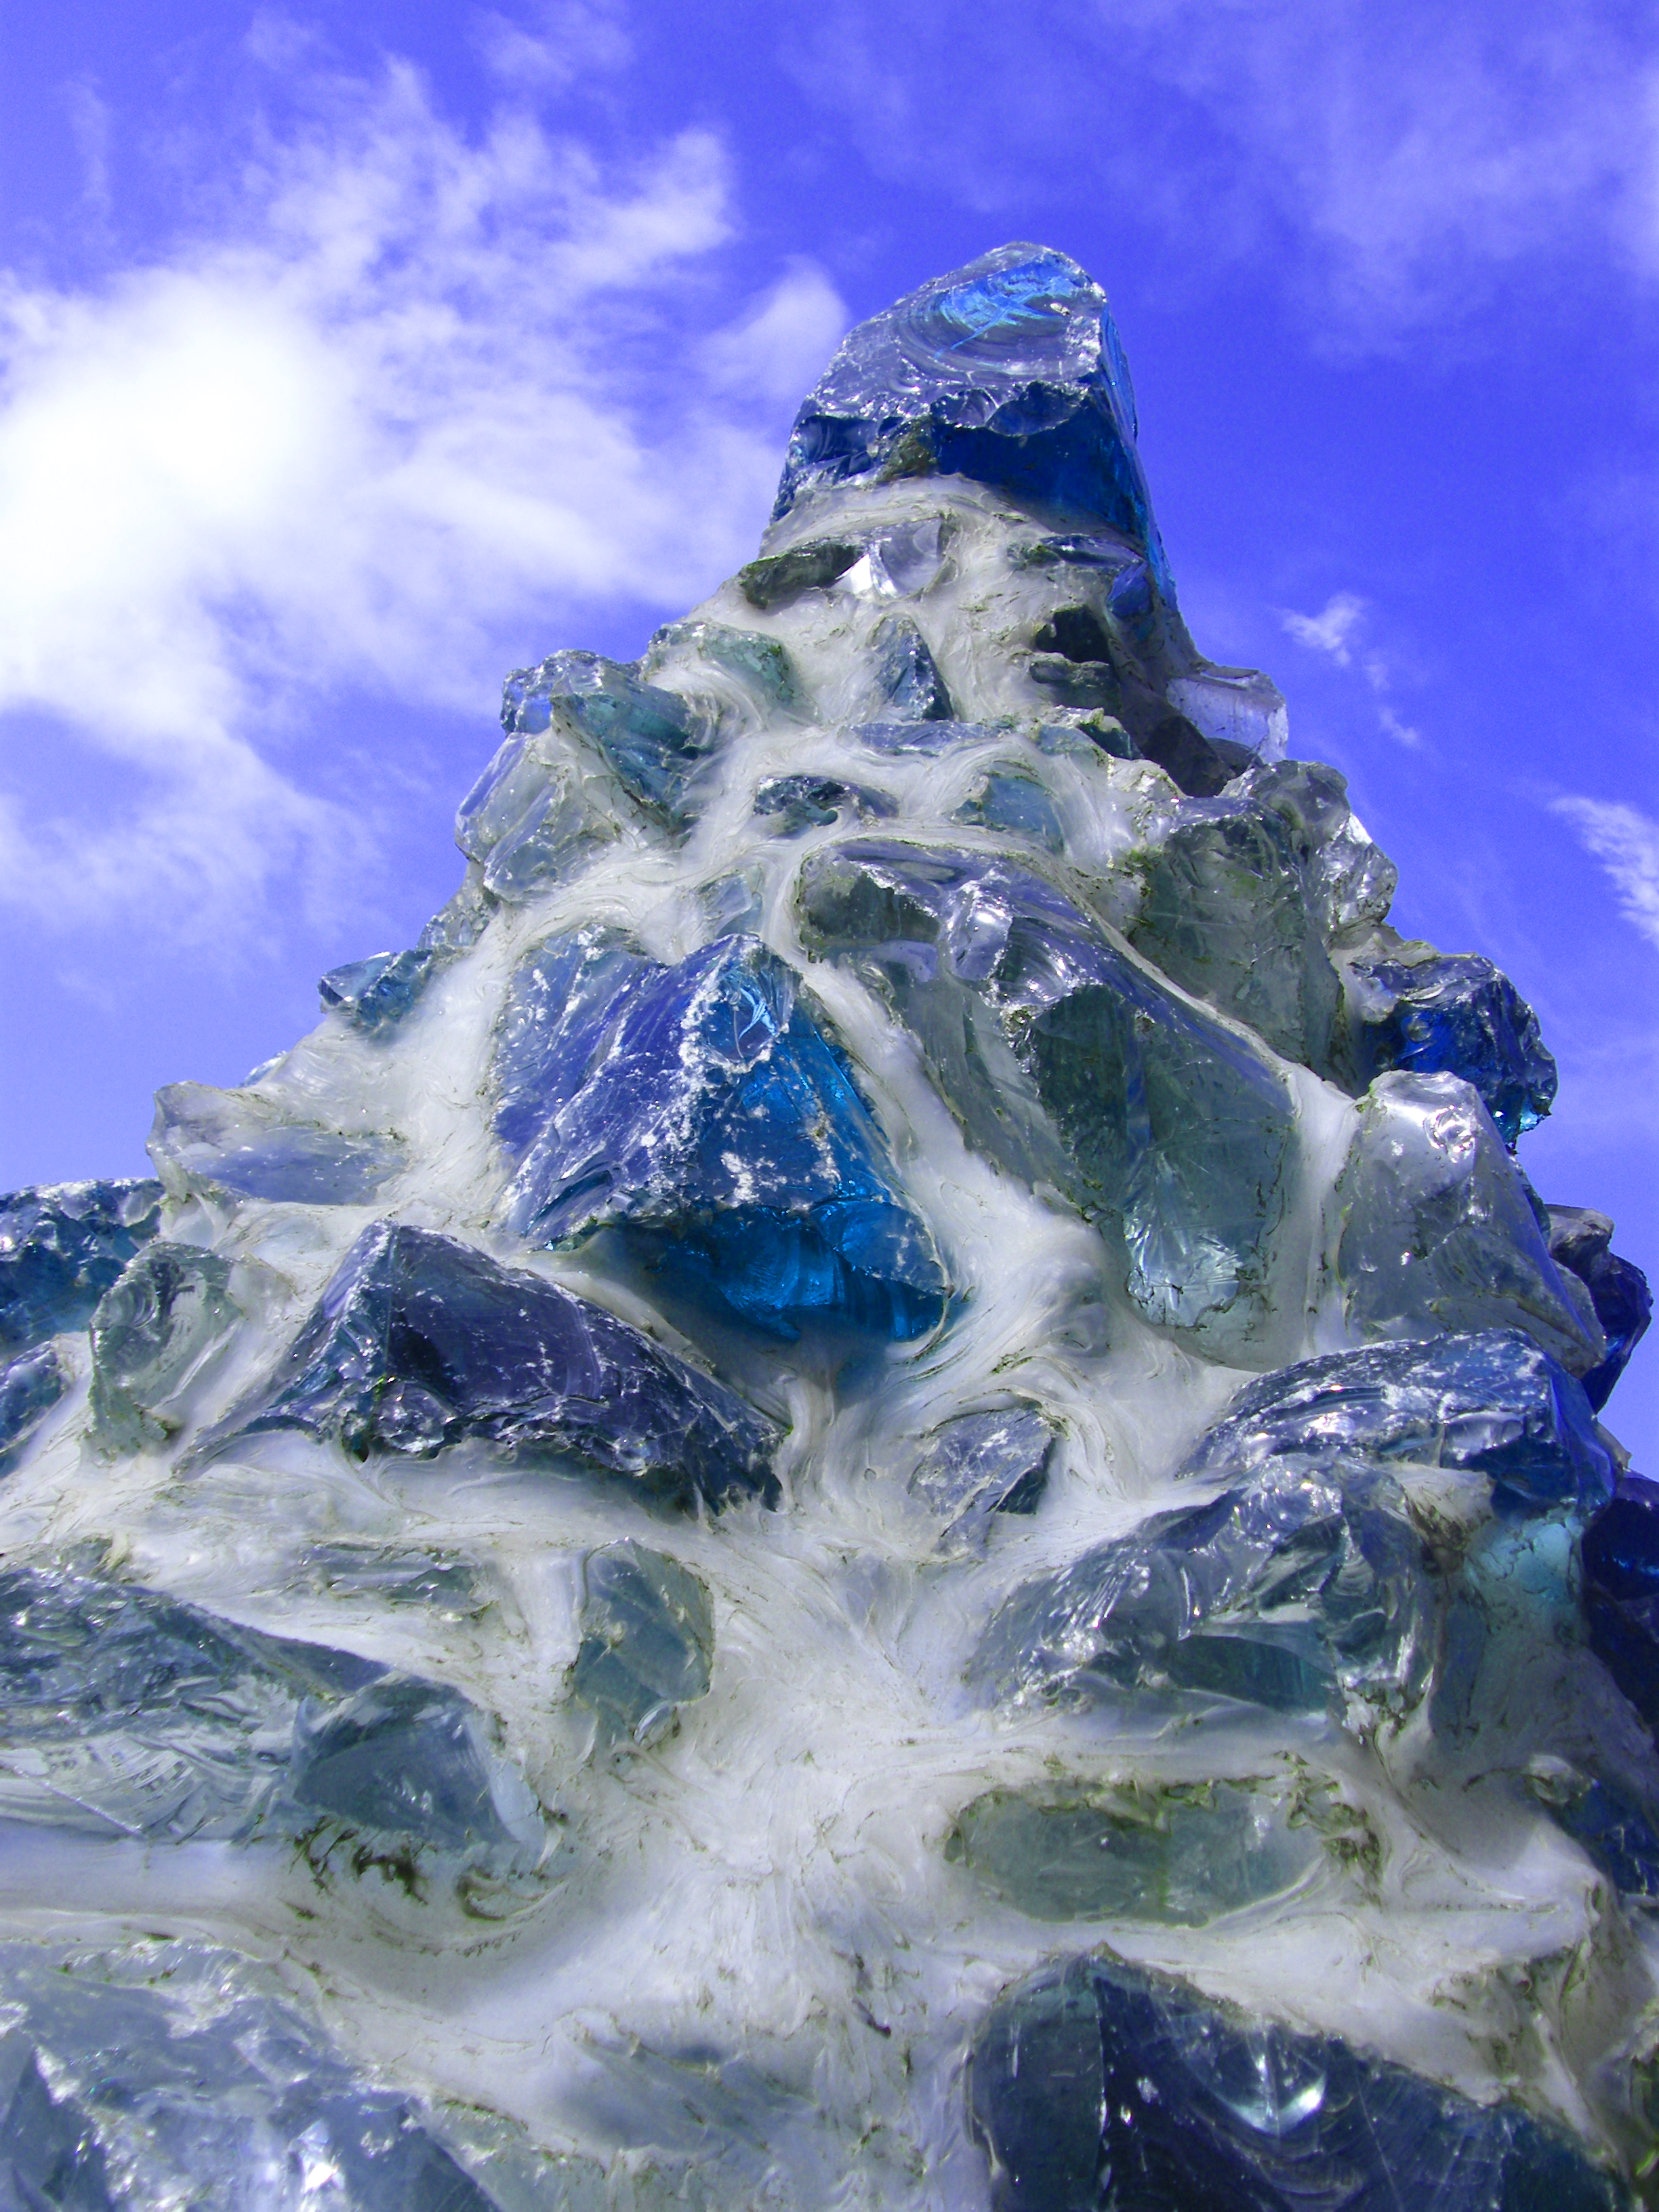 the_glass_mountain_by_queenselphie.jpg